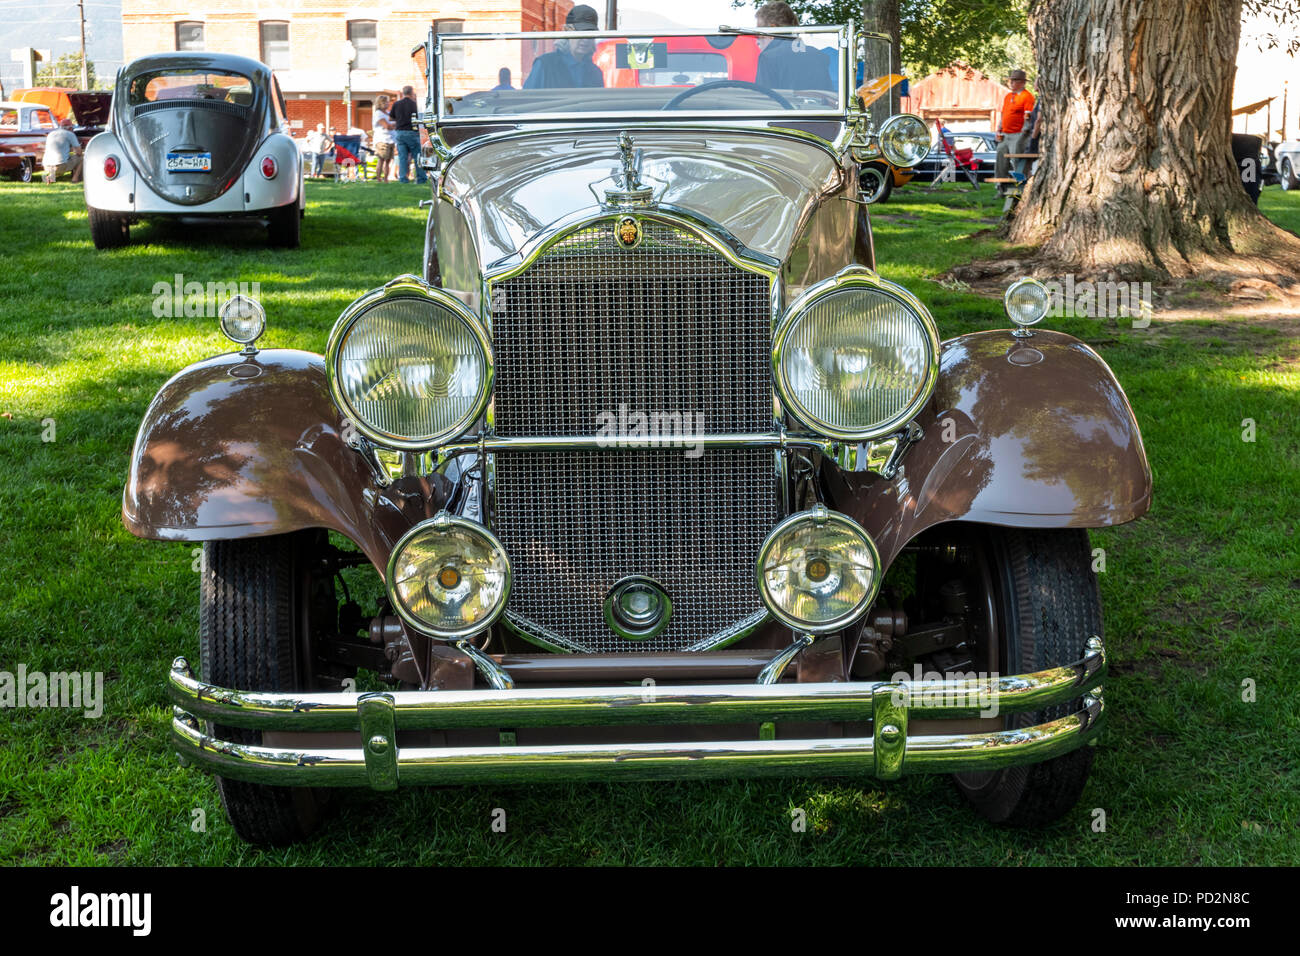 1931 Antique Packard Roadster convertible; Angel of Shavano Car Show, fund raiser for Chaffee County Search & Rescue South, Salida, Colorado, USA Stock Photo